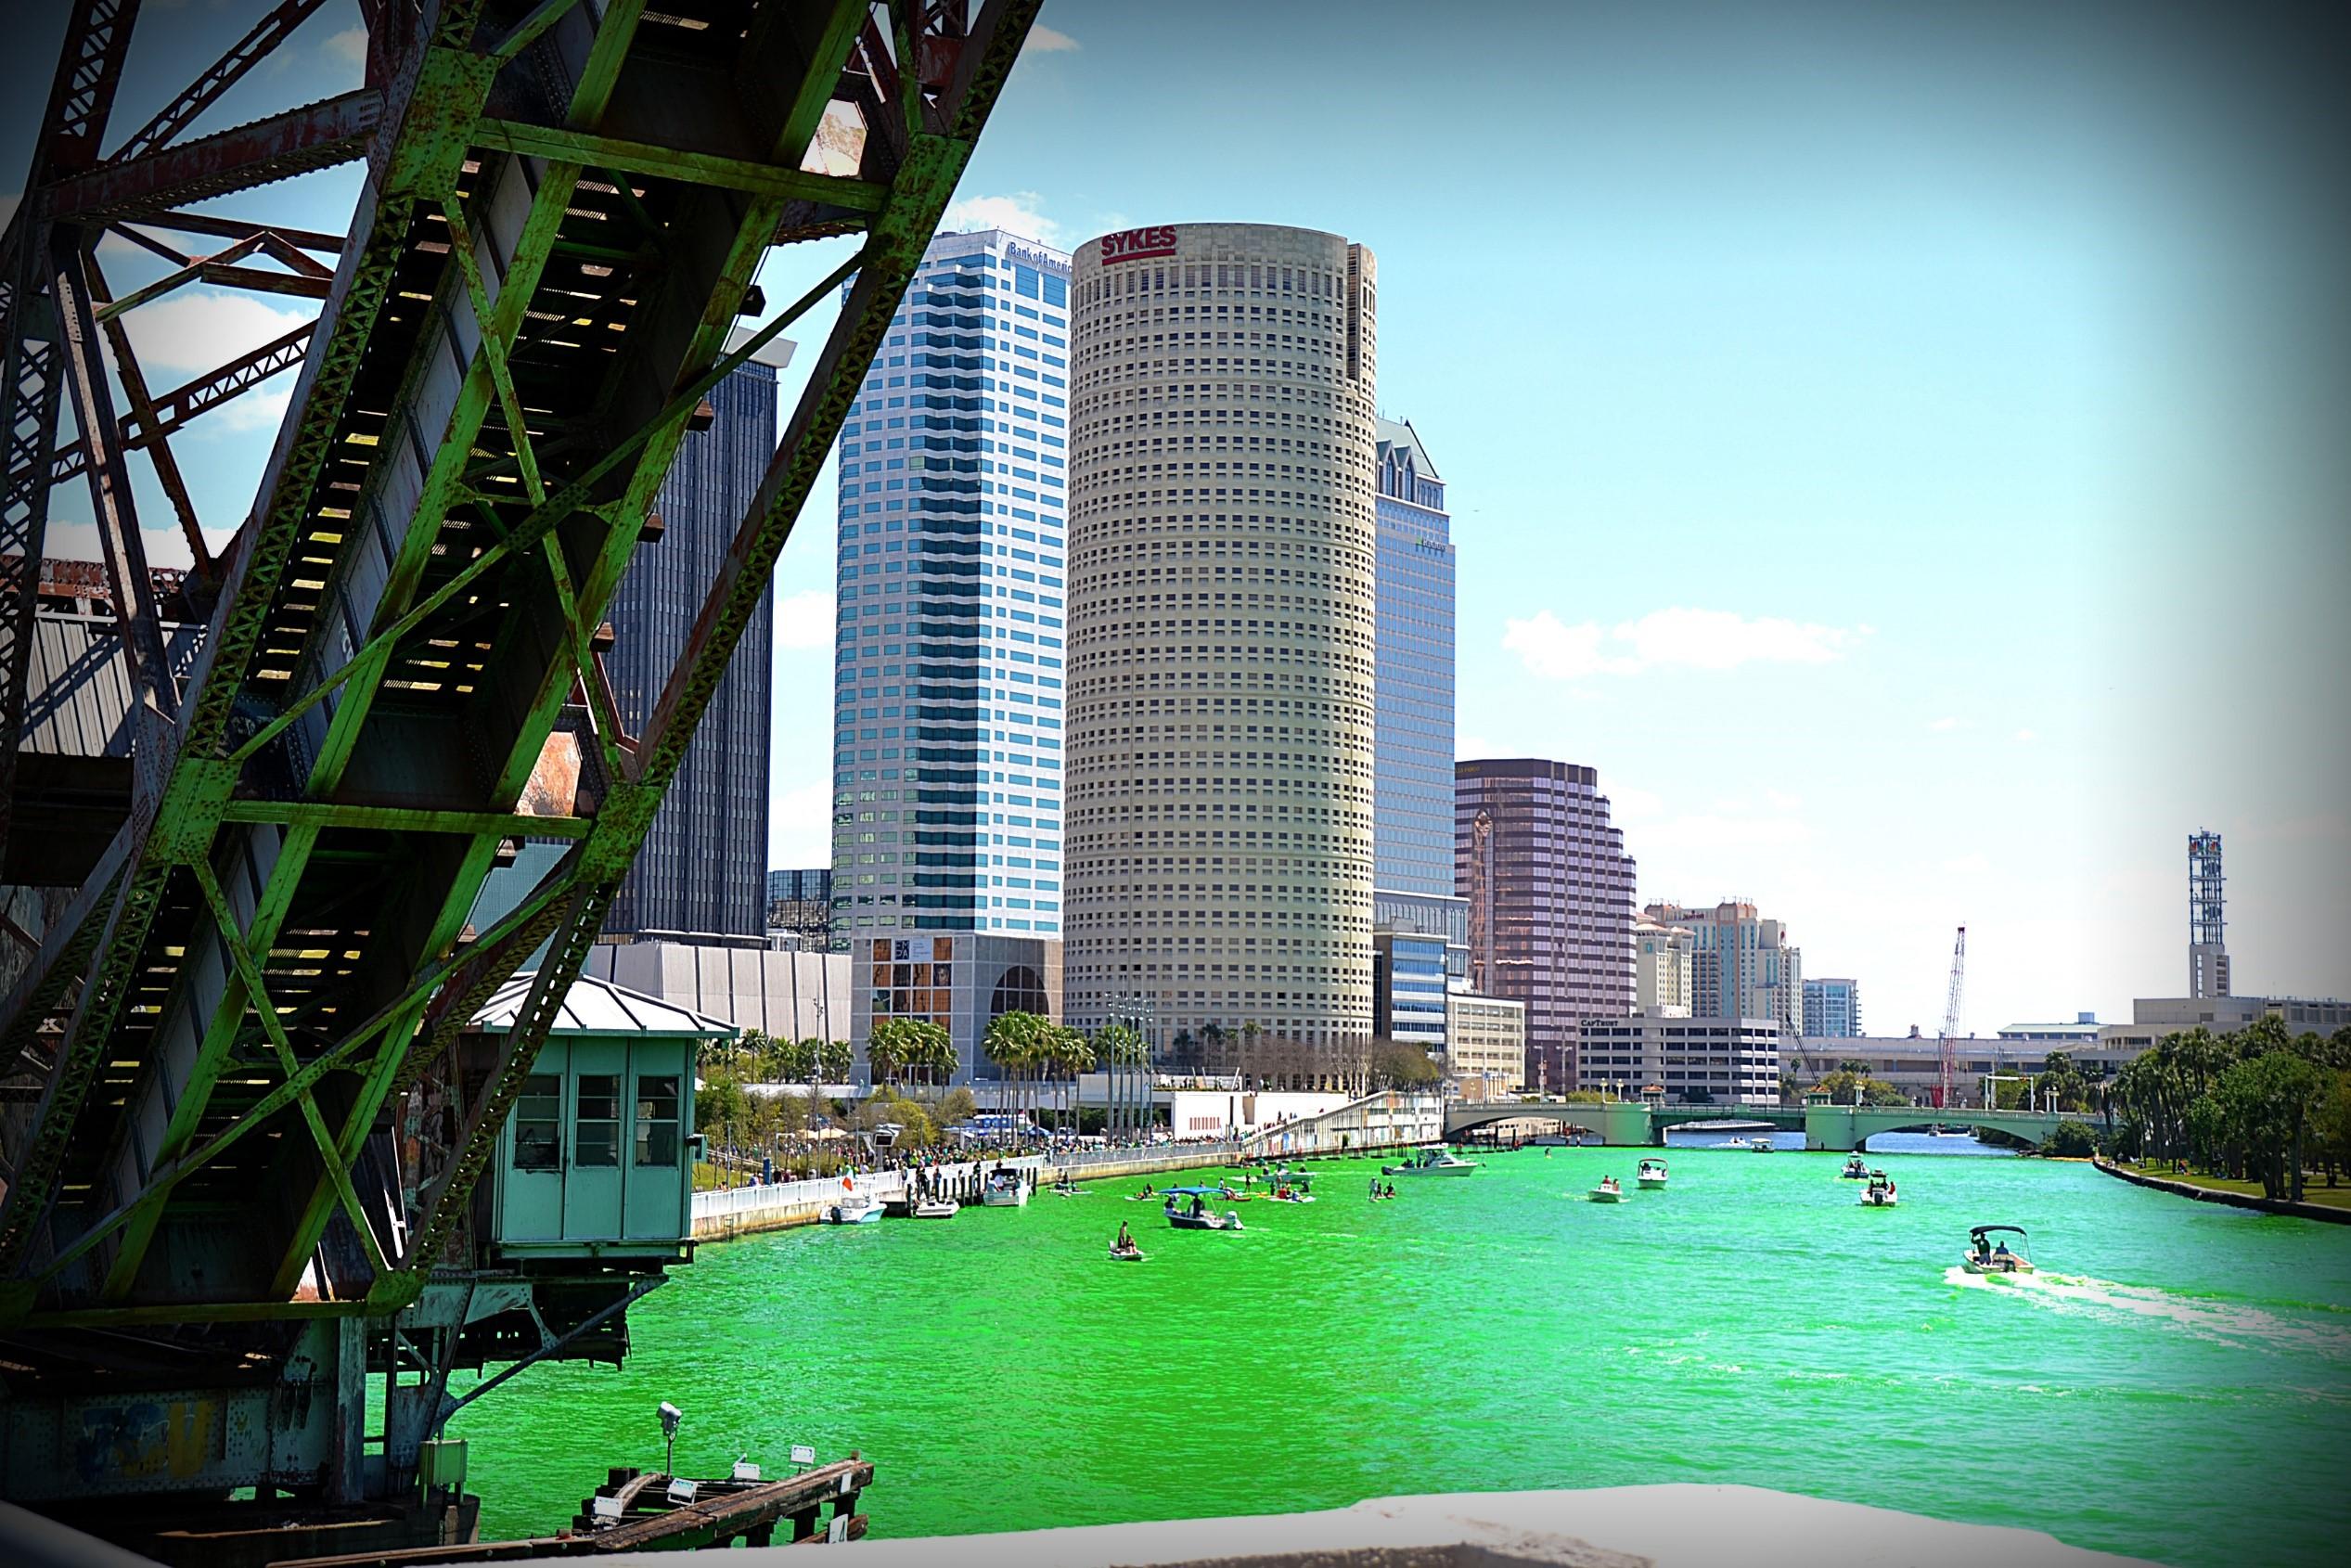 Best St Patrick's Day Ever! Top St. Patrick's Day Events + Specials for 2022